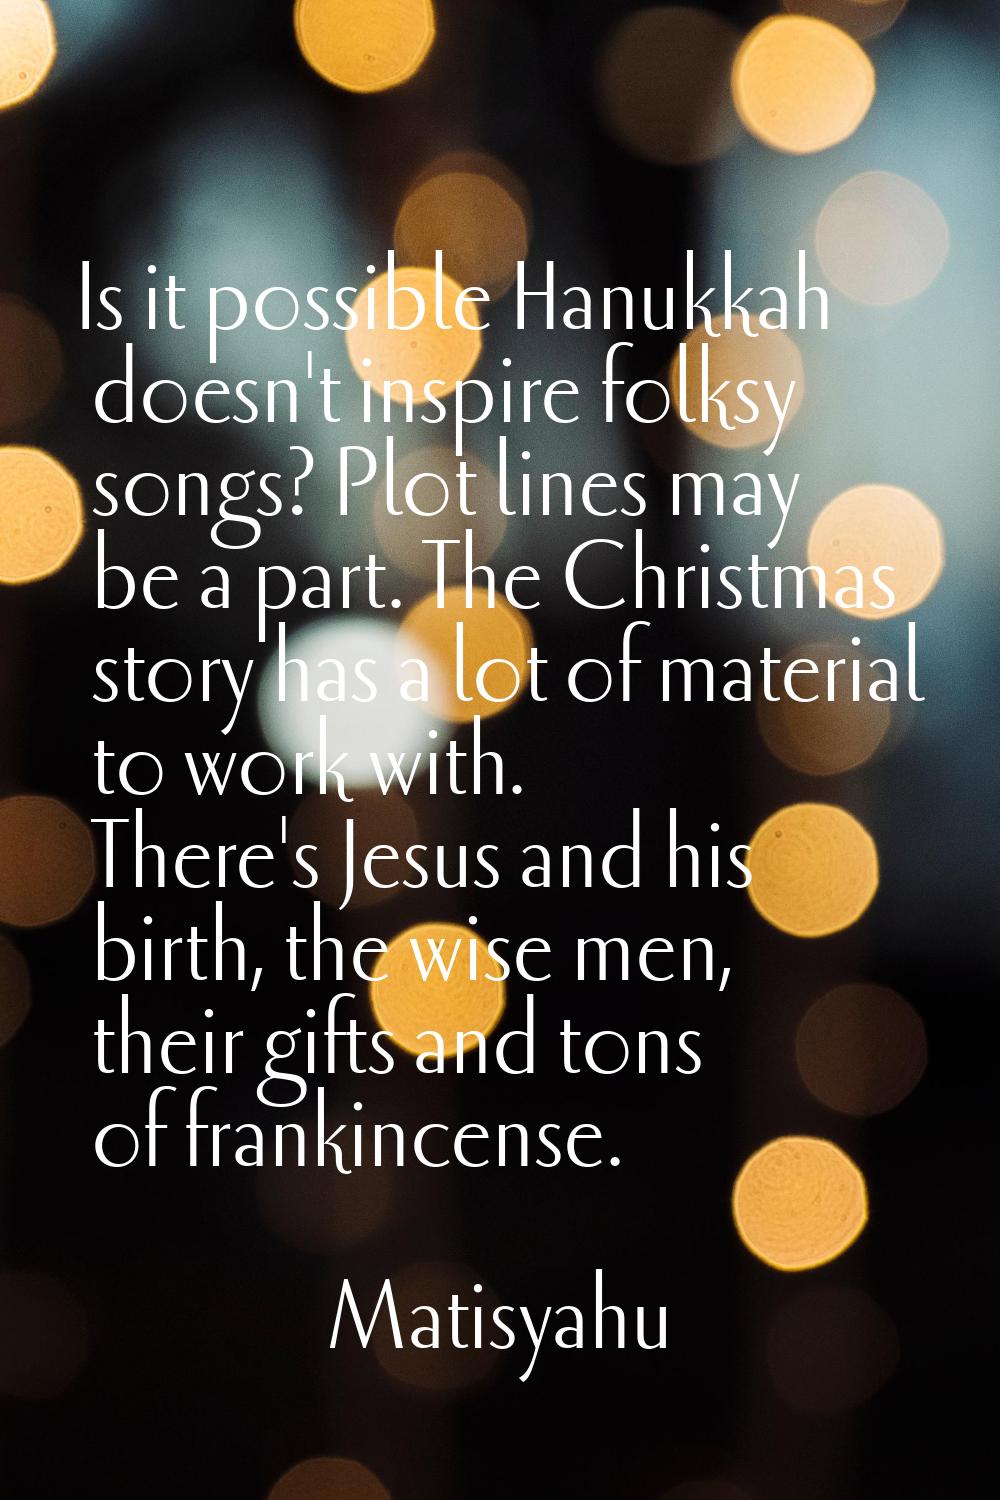 Is it possible Hanukkah doesn't inspire folksy songs? Plot lines may be a part. The Christmas story